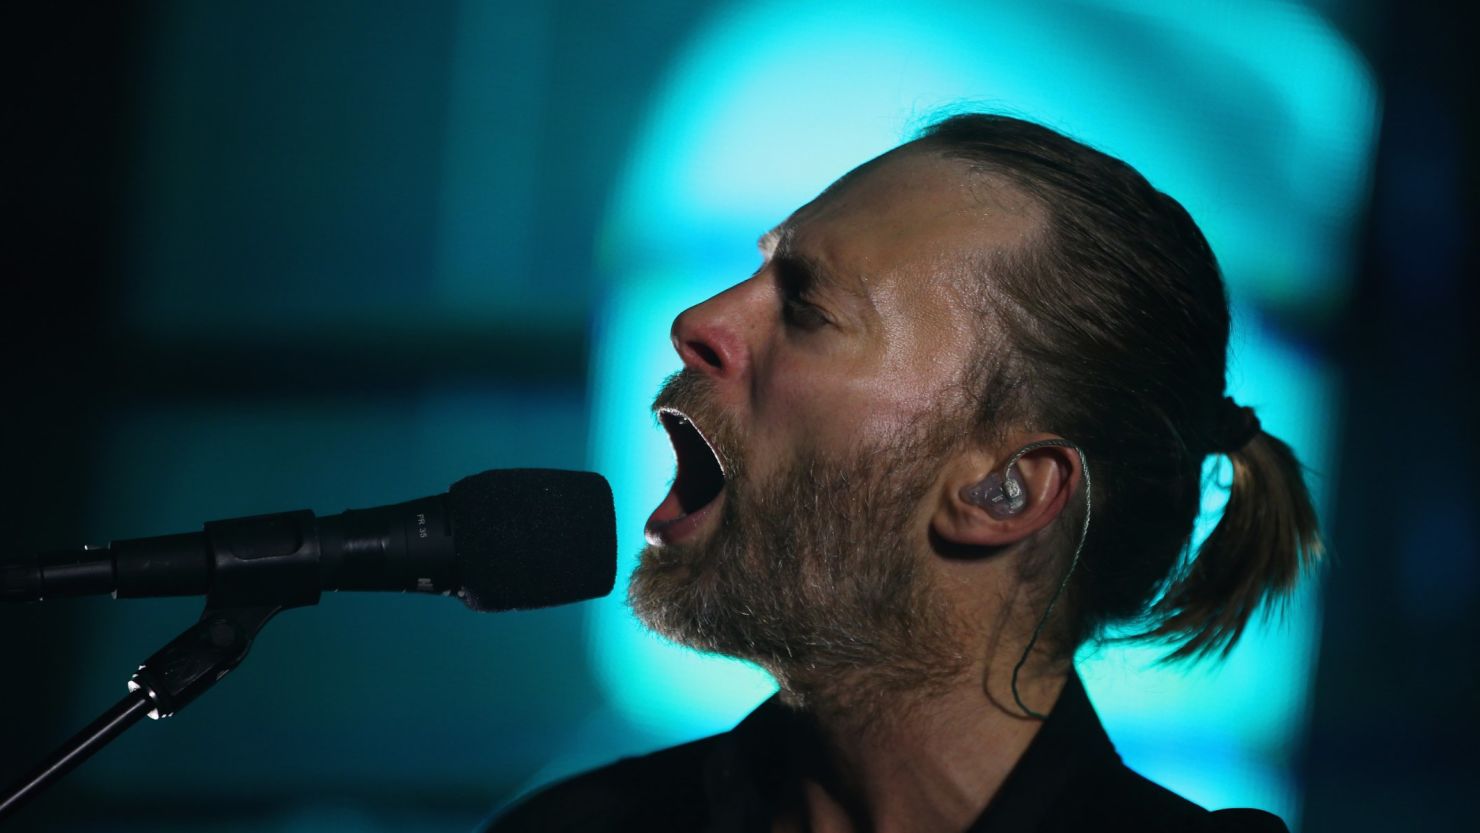 Singer Thom Yorke and his band Radiohead have fans buzzing about a possible new album release.